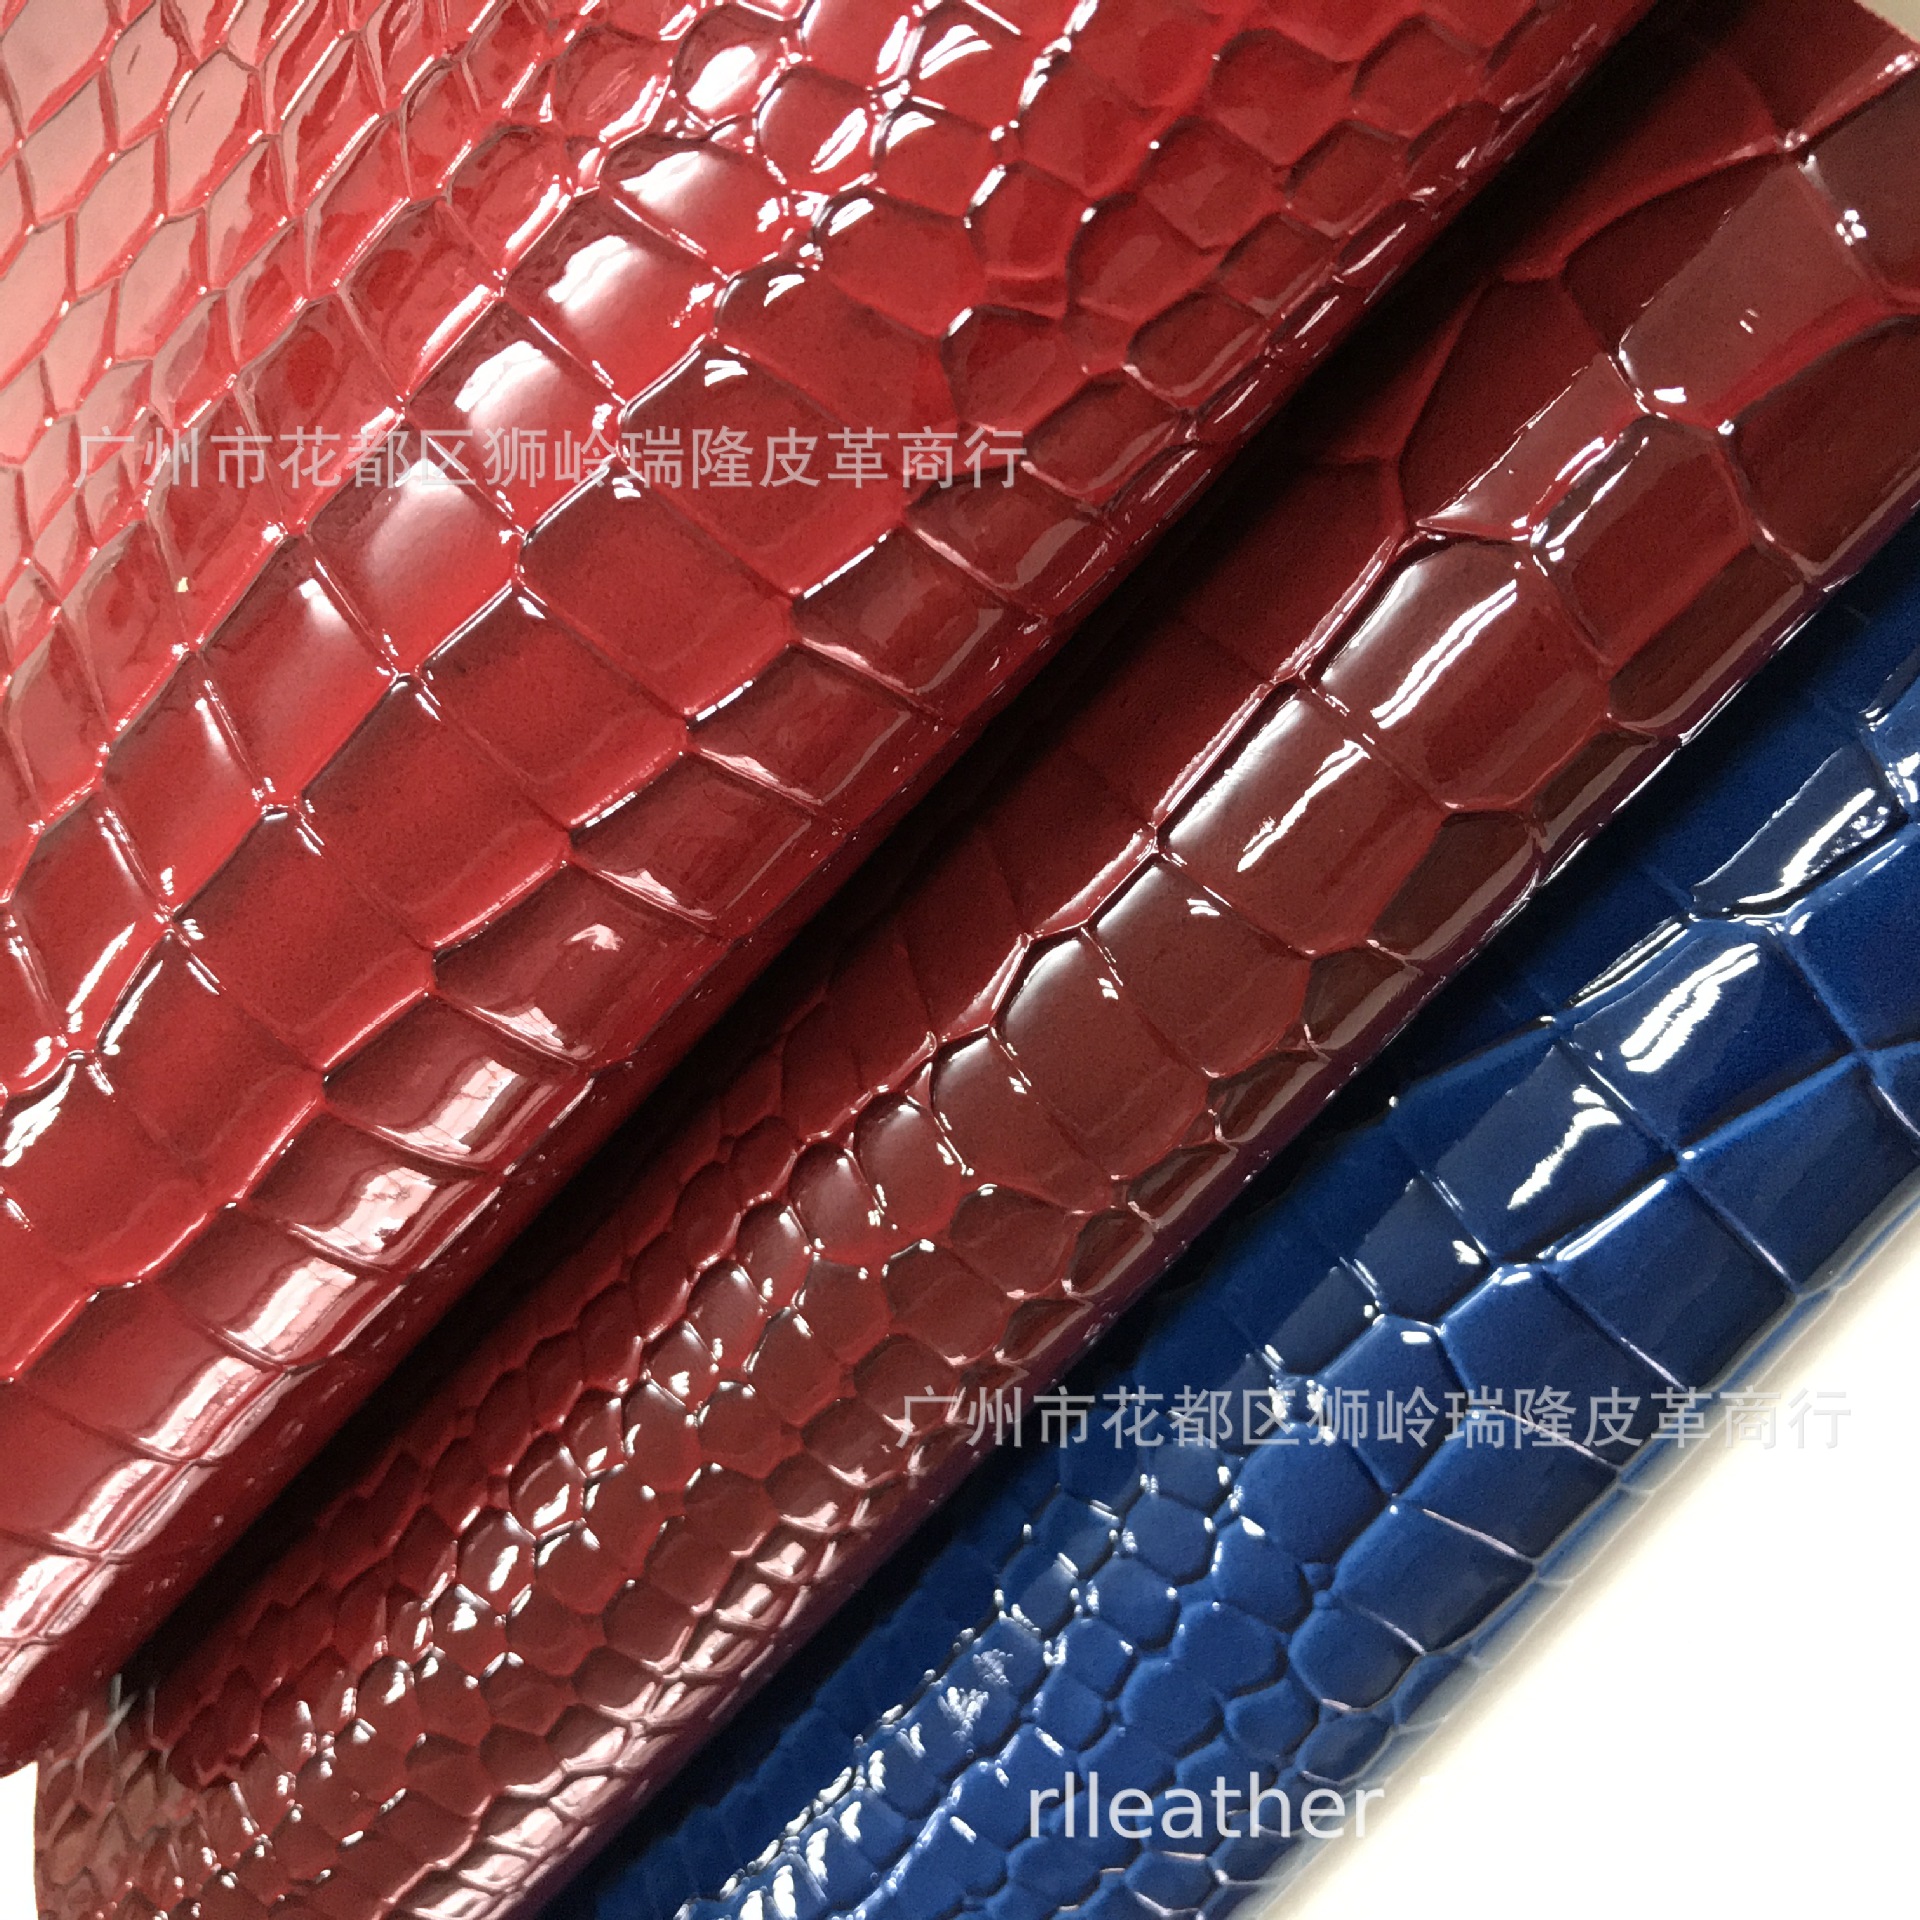 Highlight crystal Bright surface Crocodile print Stone pattern PU Leather Shoes Luggage and luggage Handbags Fabric Spot wholesale